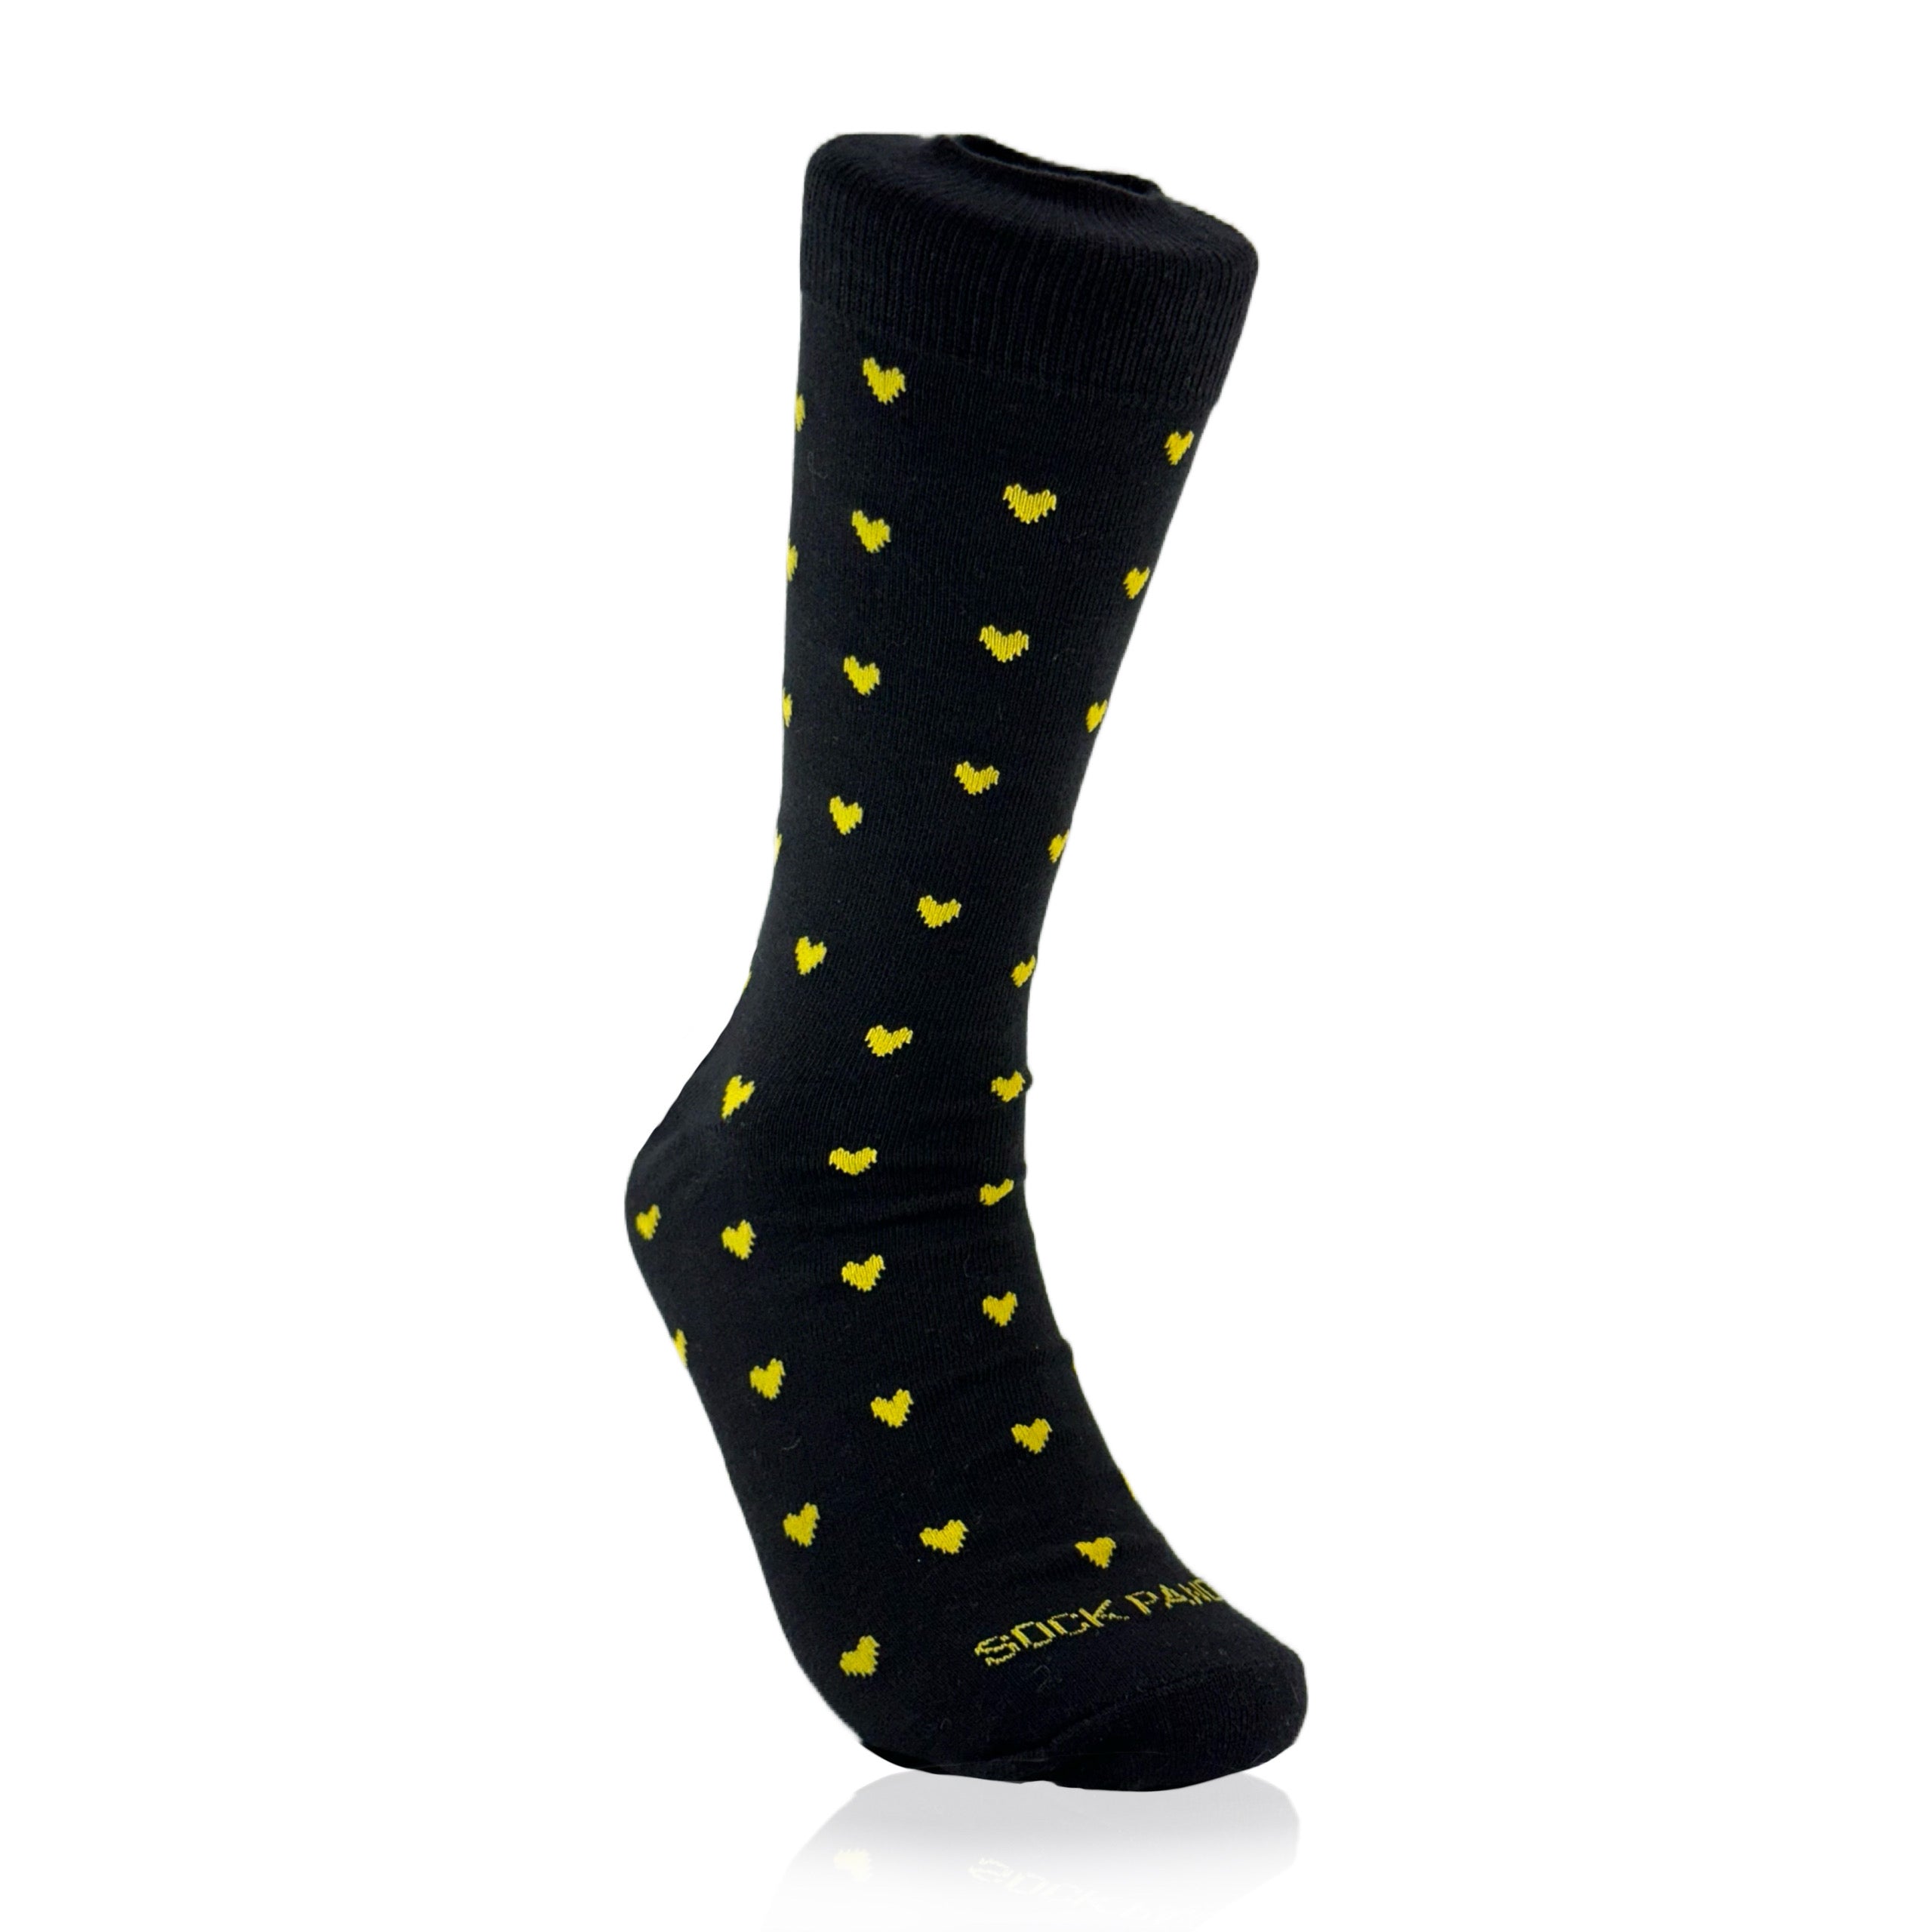 Heart Patterned Socks from the Sock Panda (Adult Large)